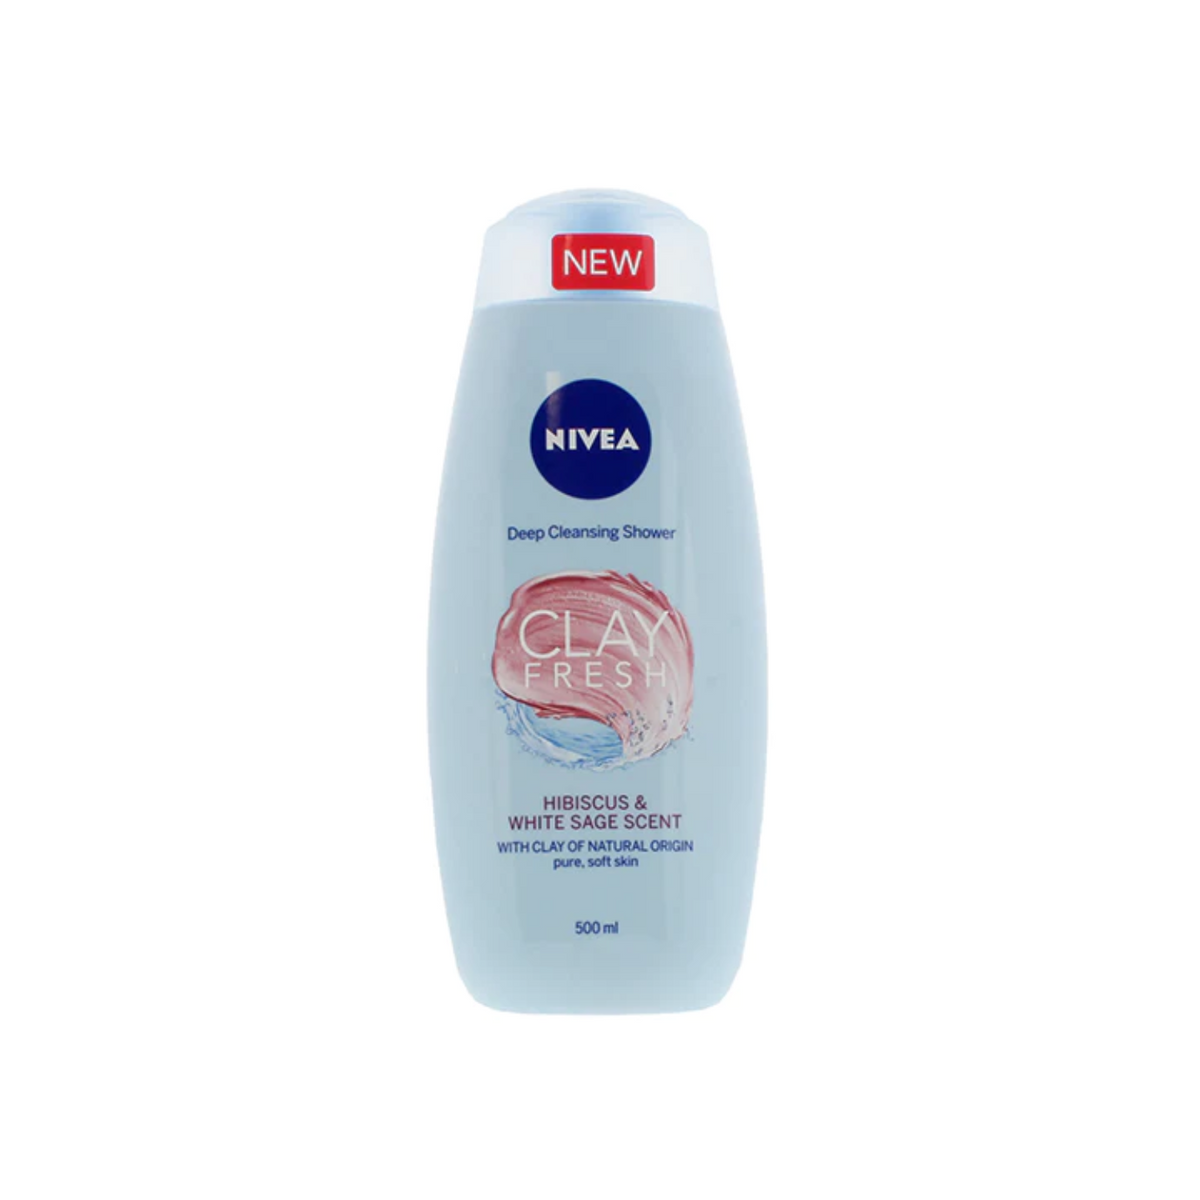 nivea-deep-sleansing-shower-clay-fresh-hibiscus-white-sage-scent-germany-500ml